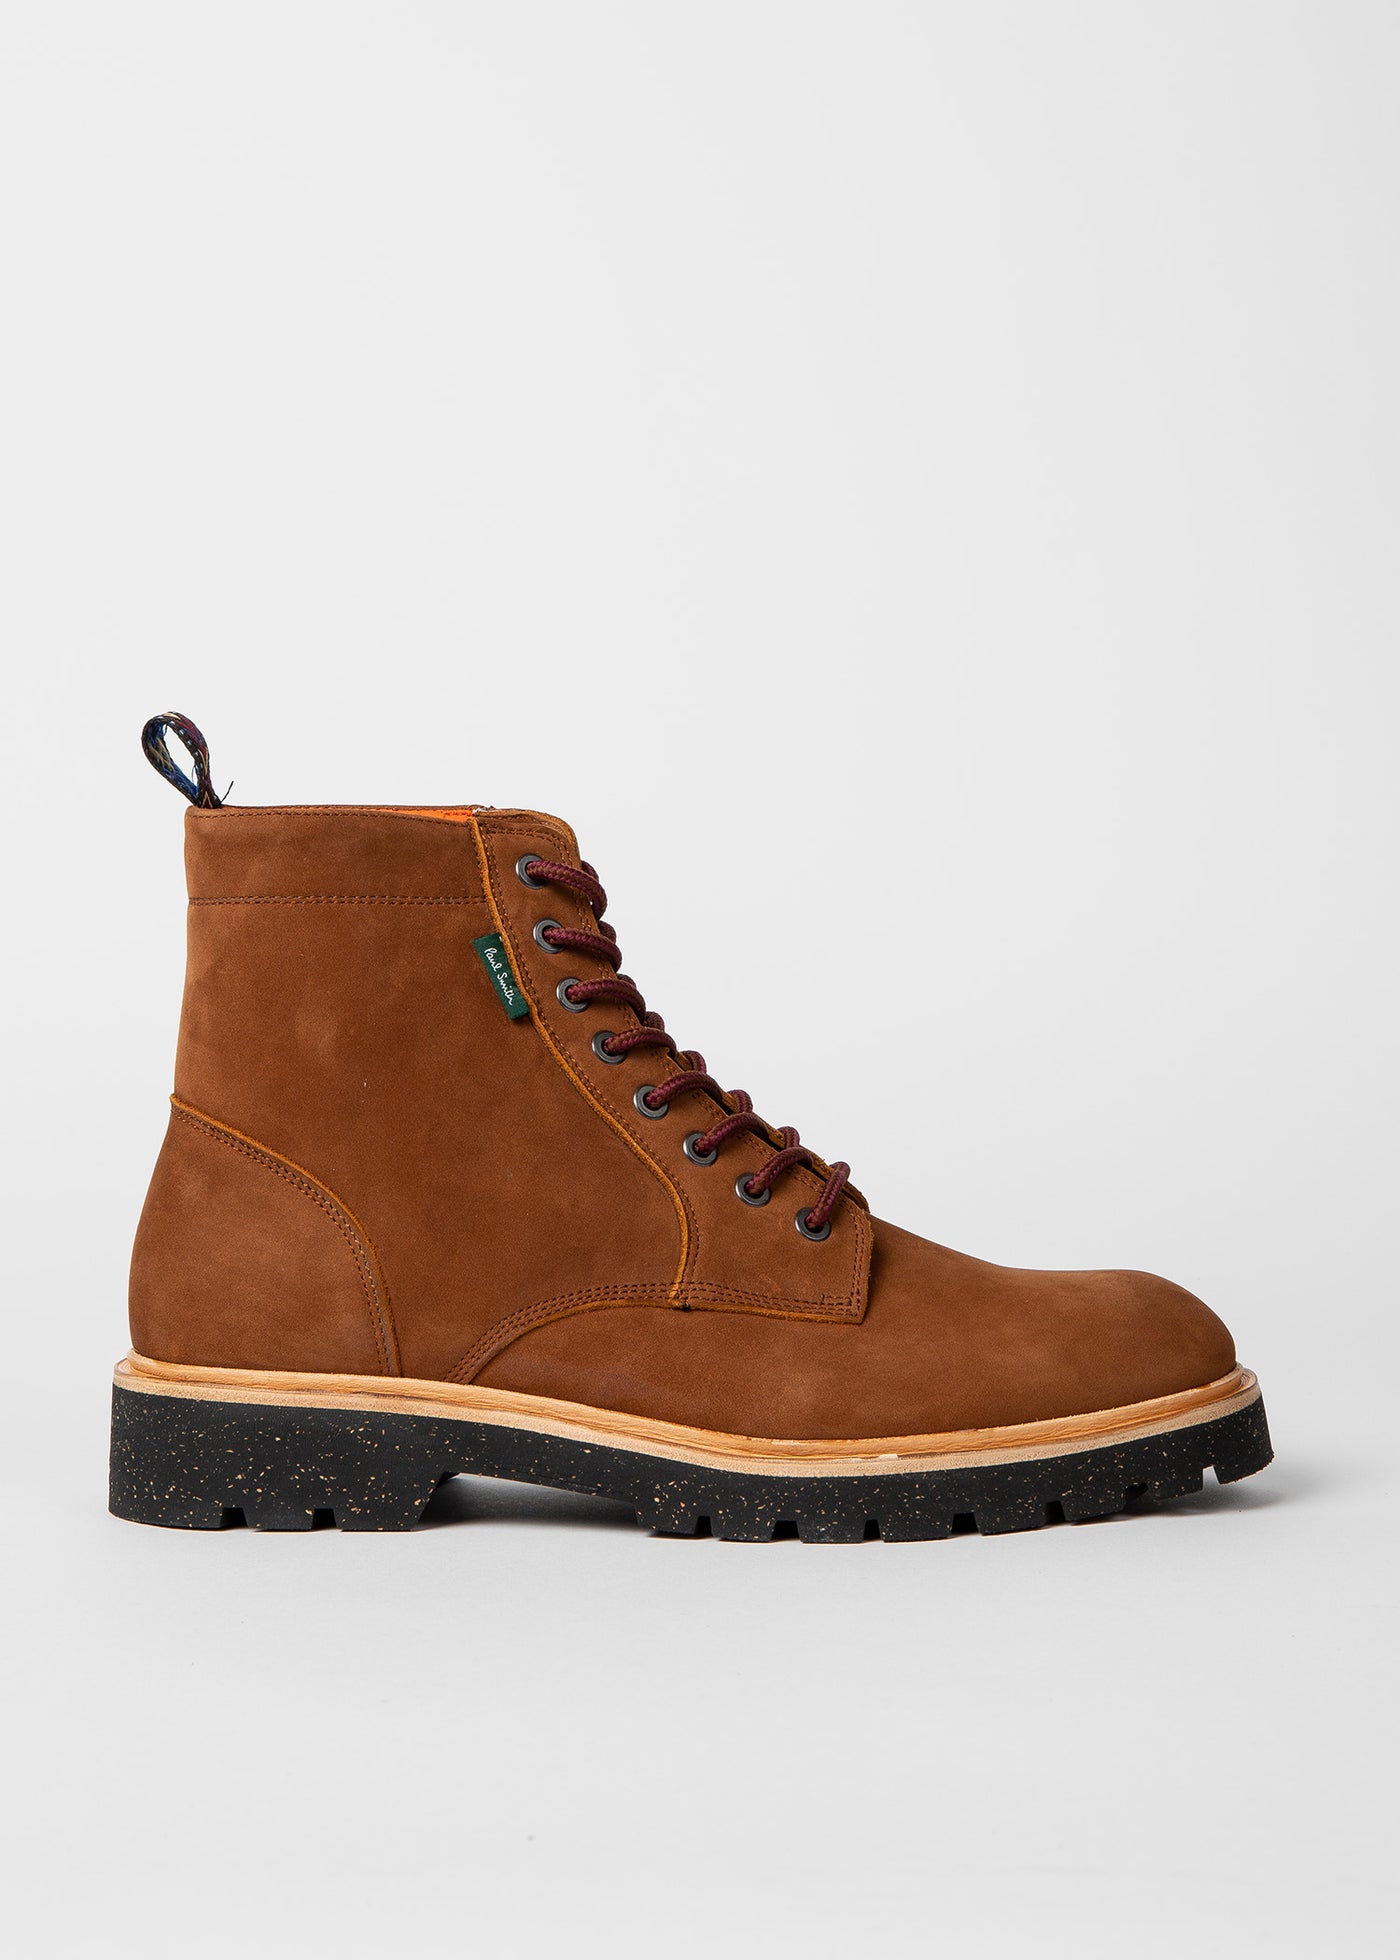 Paul Smith Boots Suede | Brown